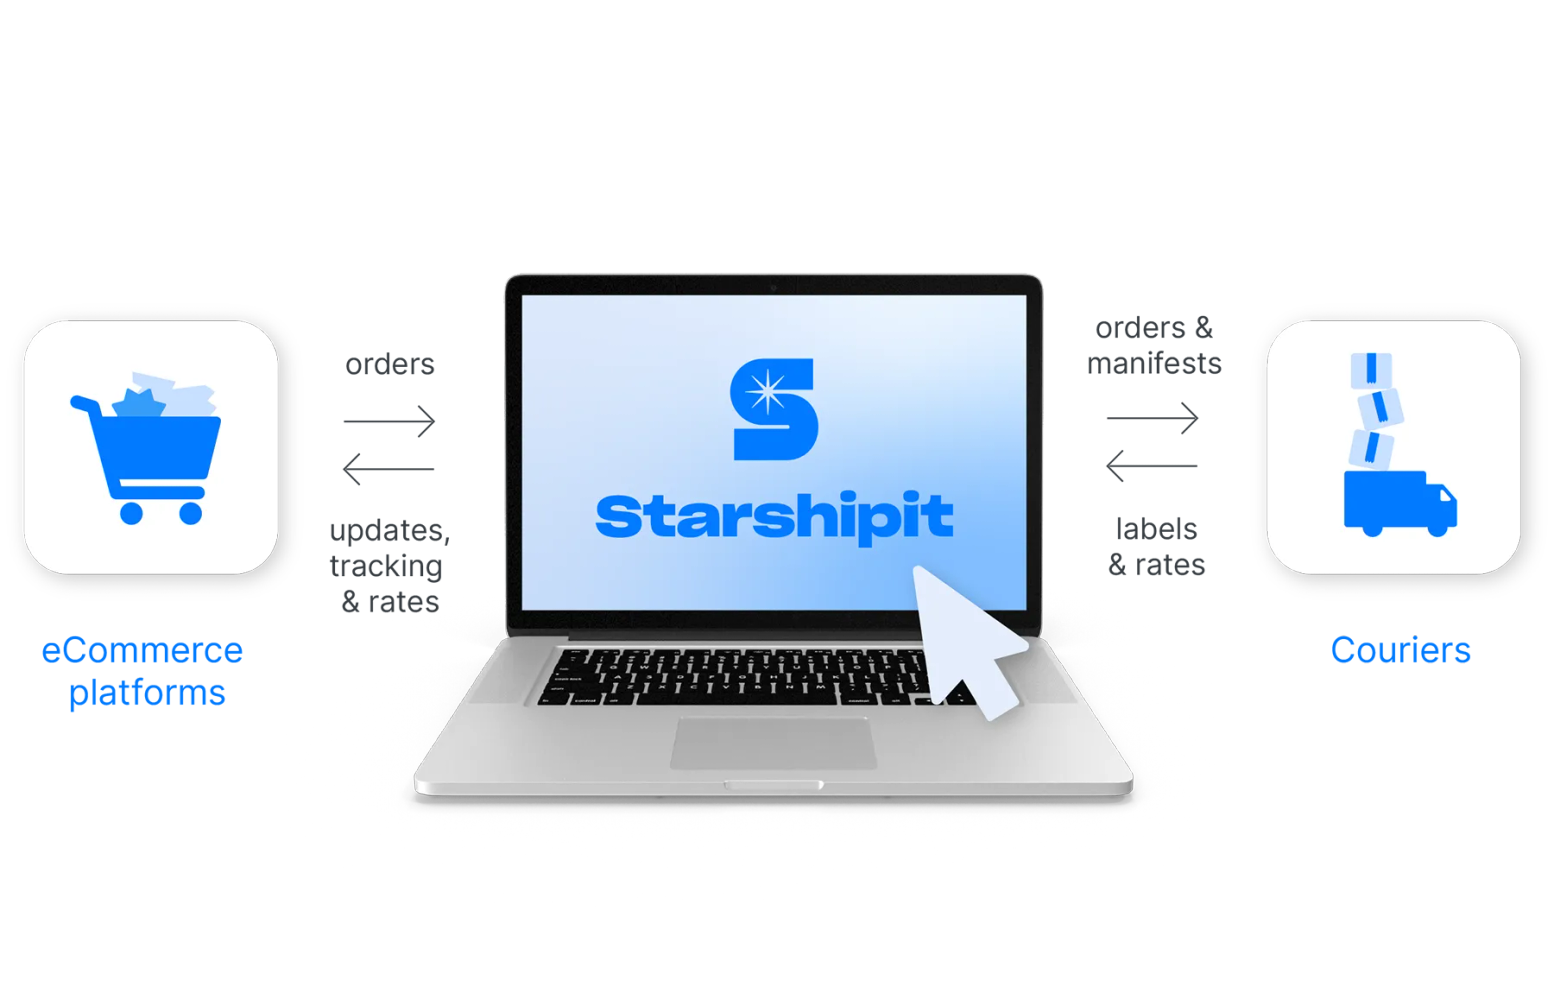 Starshipit integrates with leading platforms and couriers